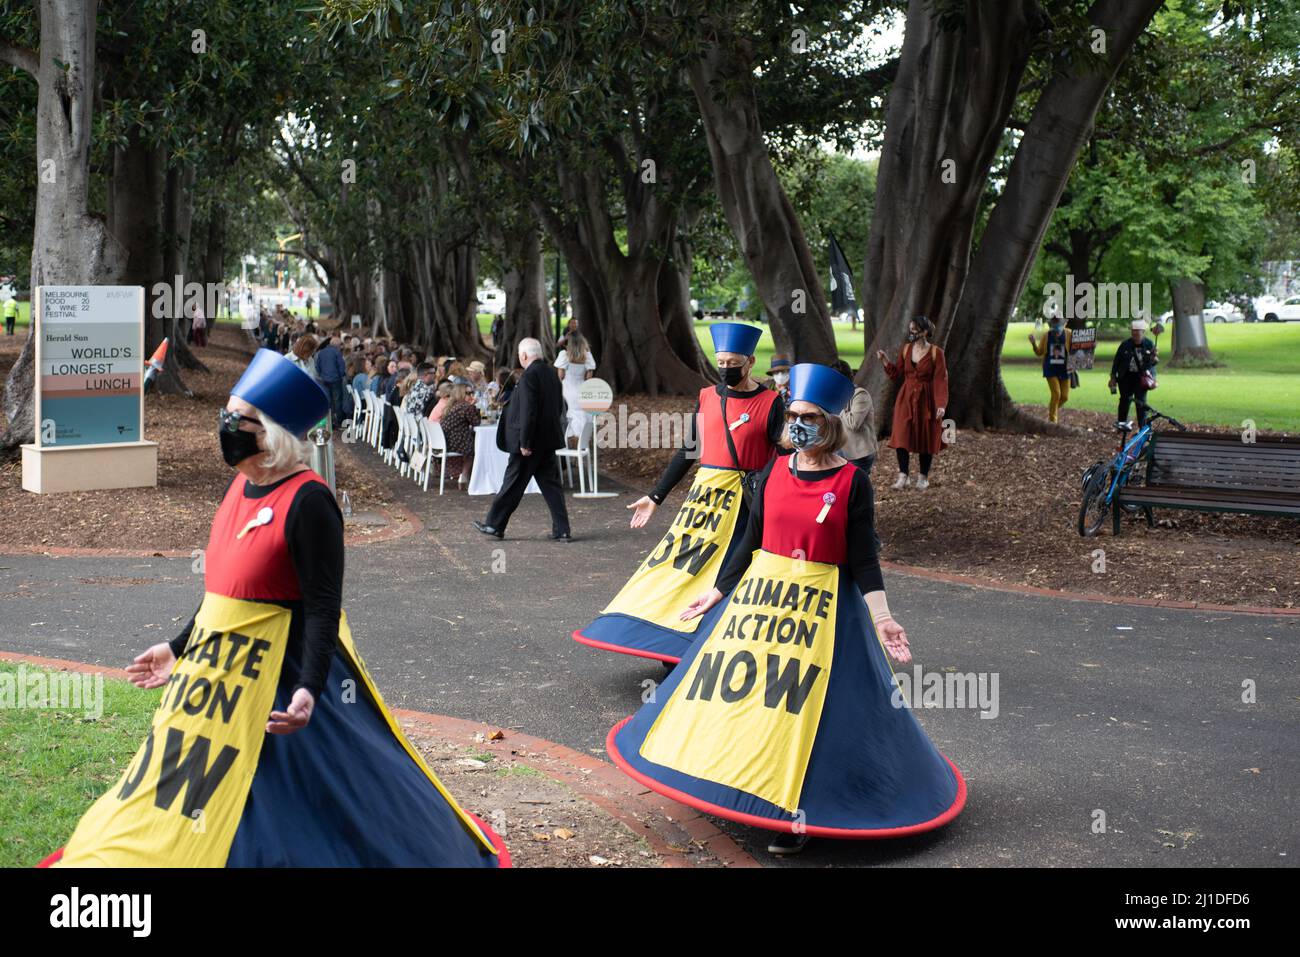 Melbourne, Australia. 25th March 2022. Extinction Rebellion protesters against climate change walk past the World's Longest Lunch taking place as part of the Melbourne Food and Wine Festival, after a school strike for climate change. Credit: Jay Kogler/Alamy Live News Stock Photo